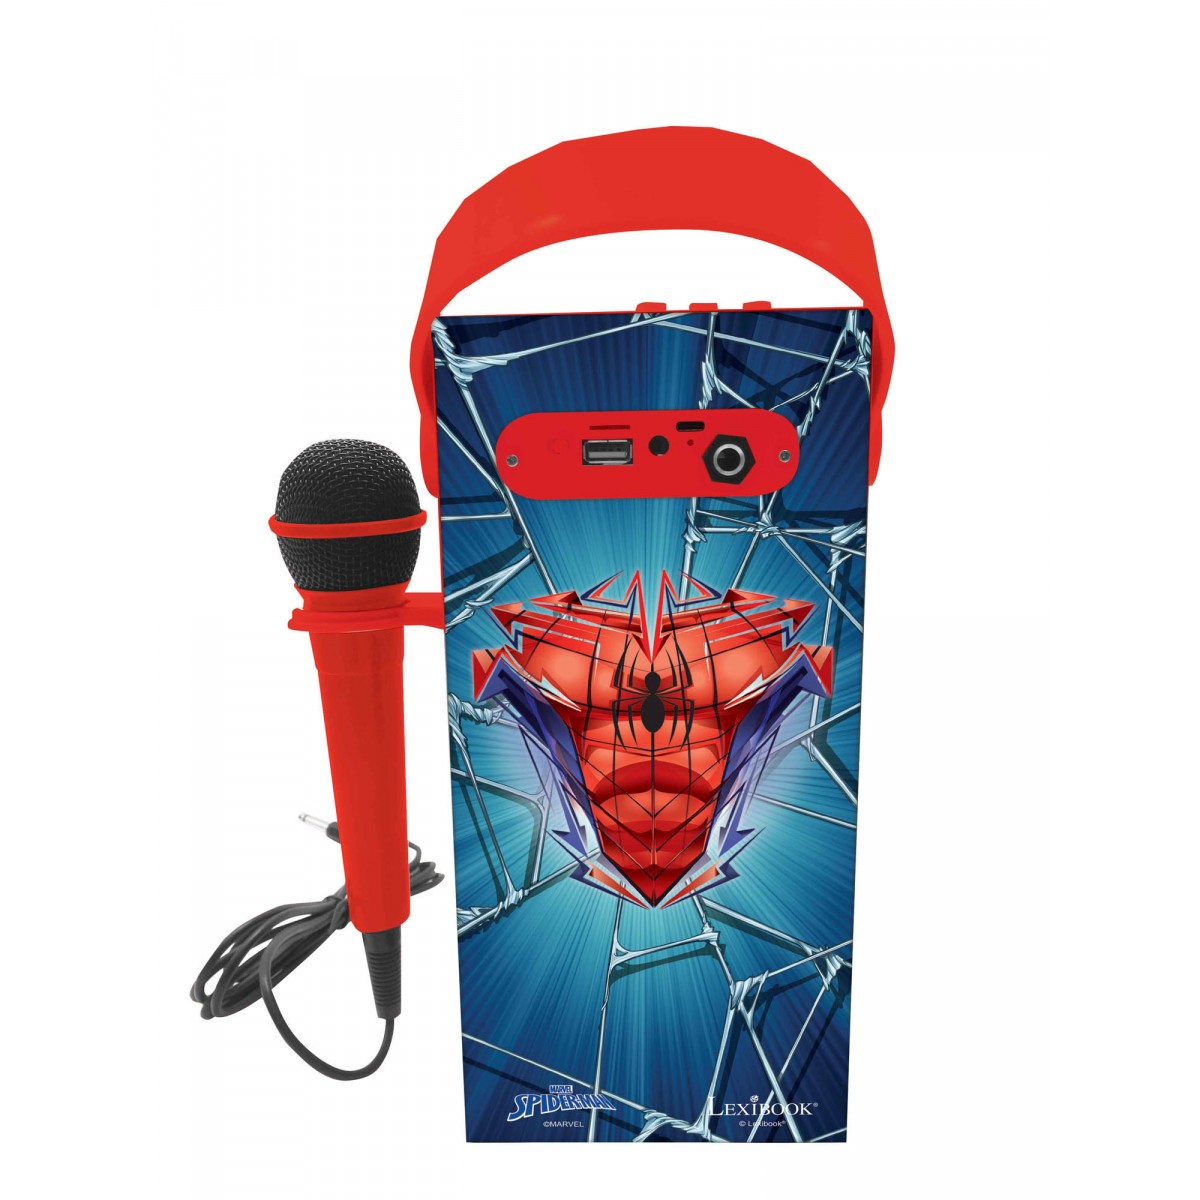 Marvel Spiderman - Portable Bluetooth Lighted Speaker with Microphone